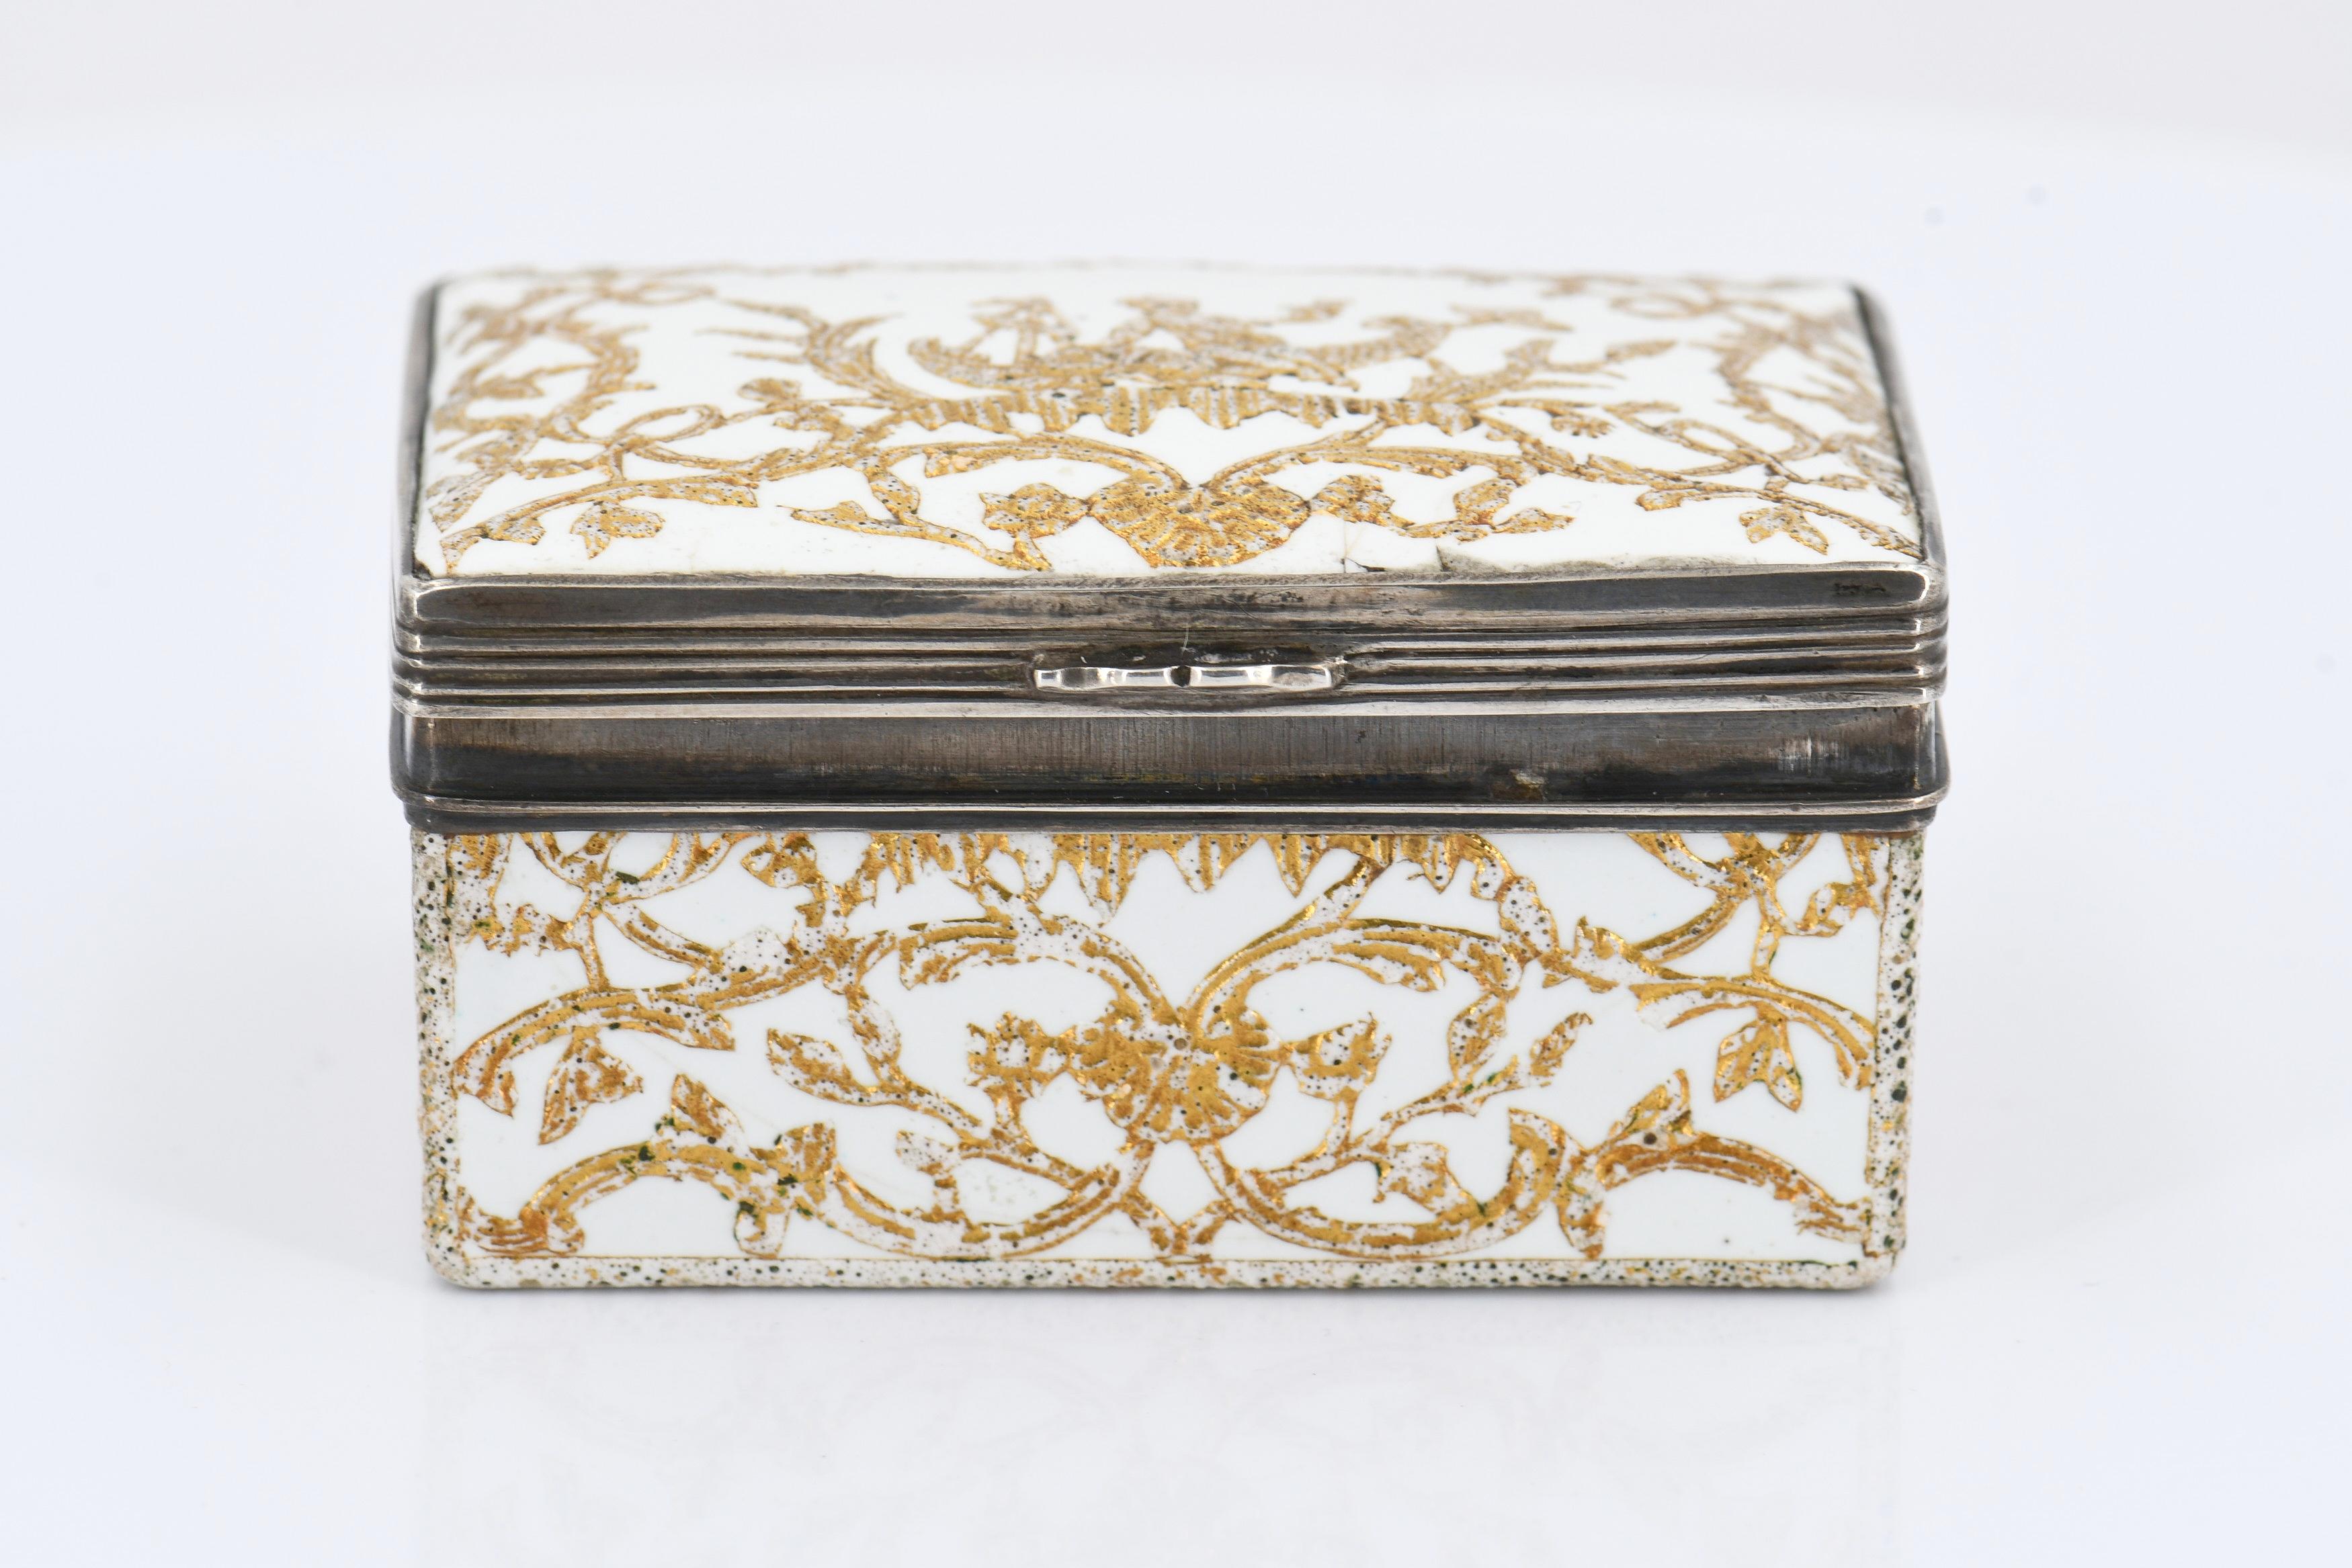 Snuff box with gold décor - Image 5 of 8